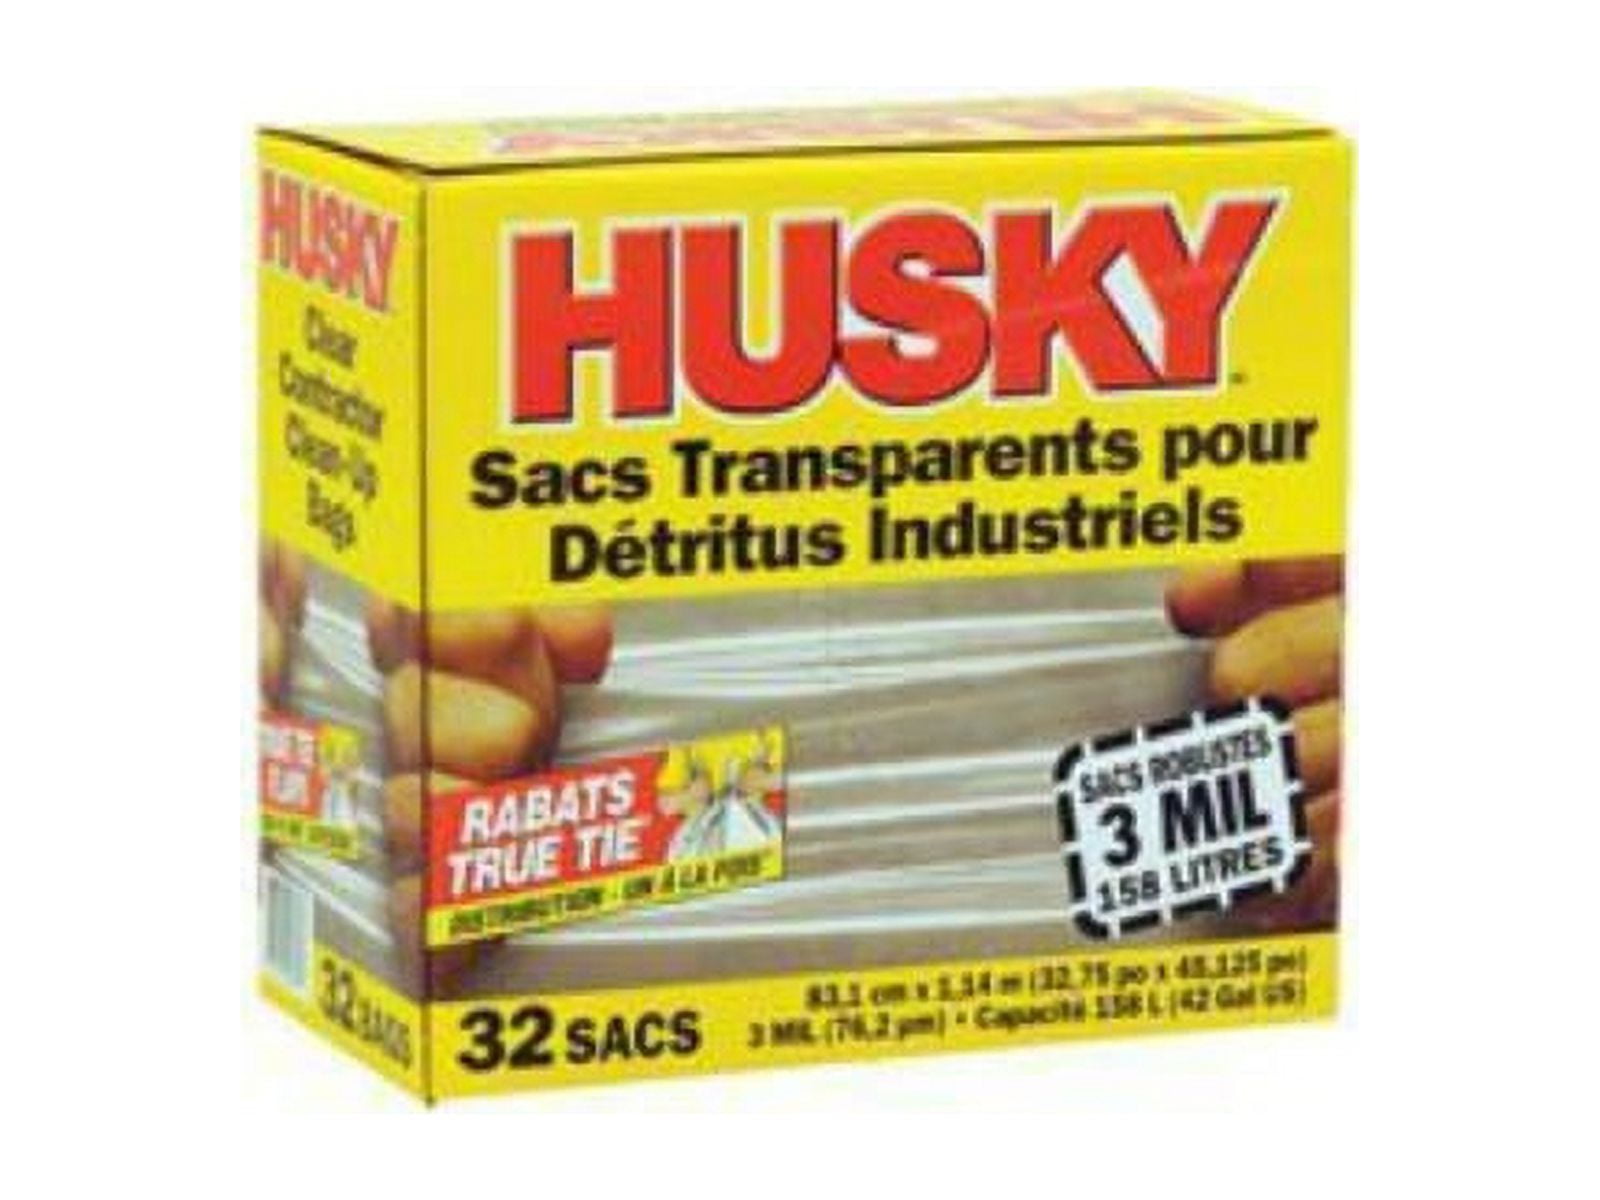 Husky Heavy Duty Contractor Bags, 42 Gallon, 40 Bags, 2 Mil